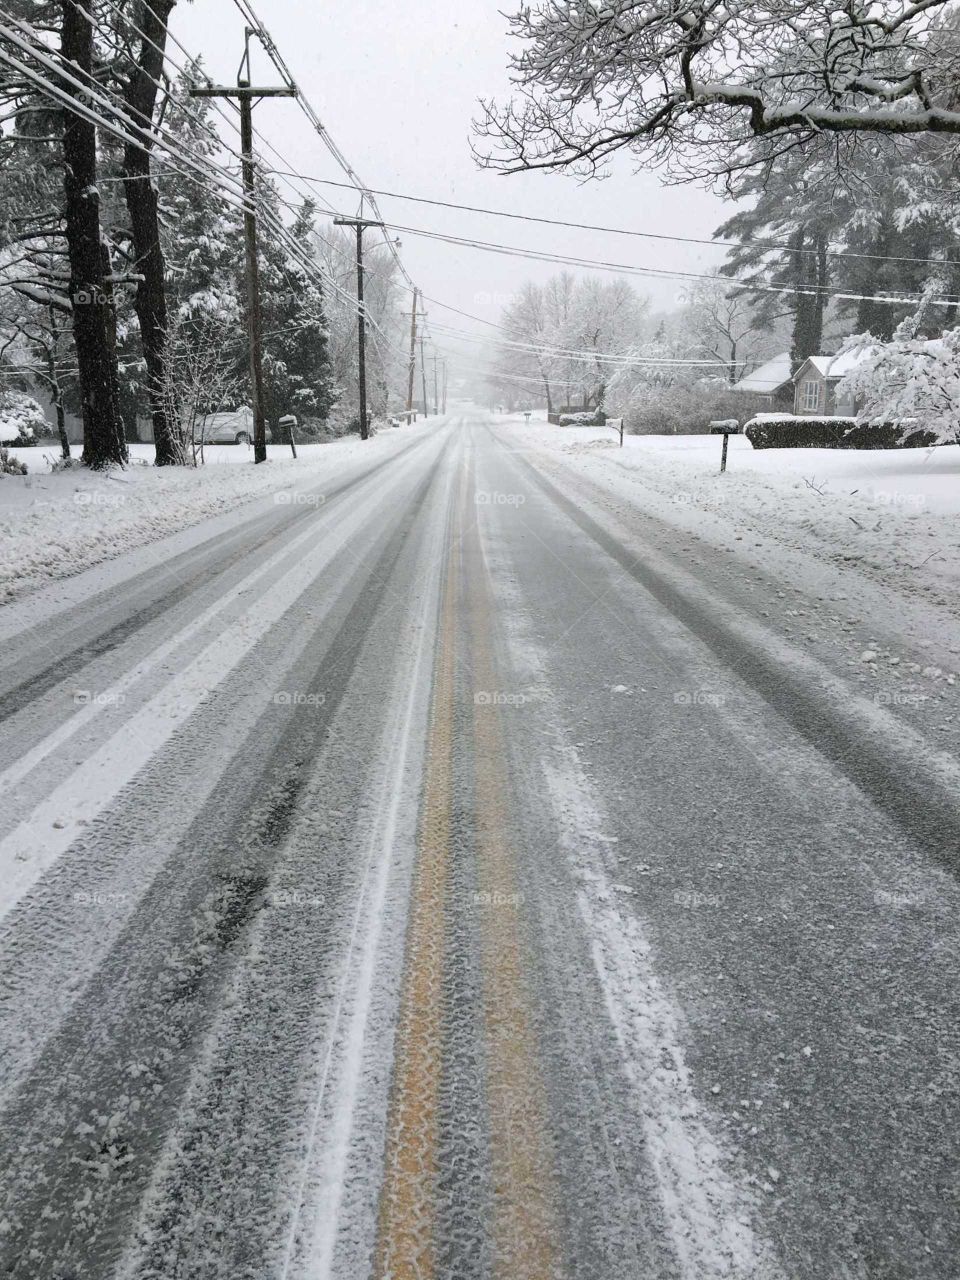 Roads in the USA! Road after snowstorm, no cars, just plowed road!